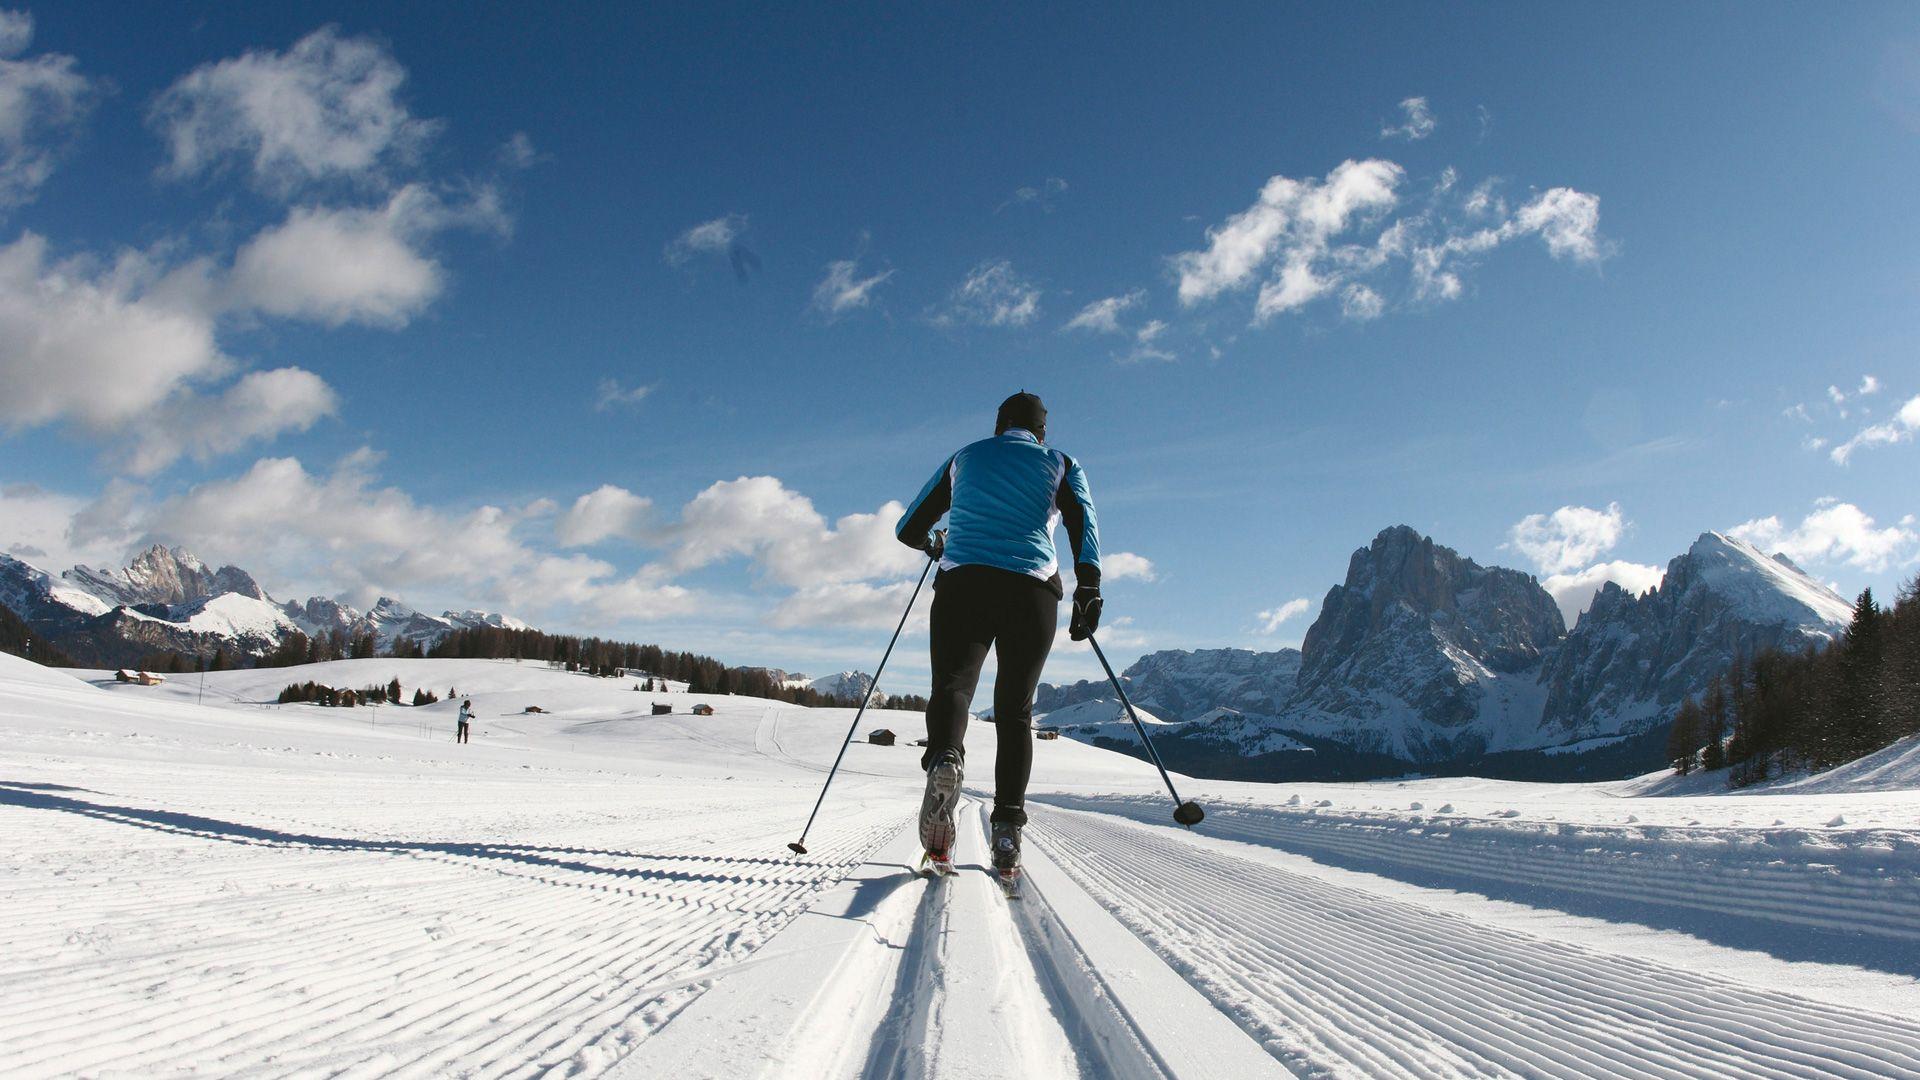 Cross Country Skiing Wallpaper 53333 1920x1080 px